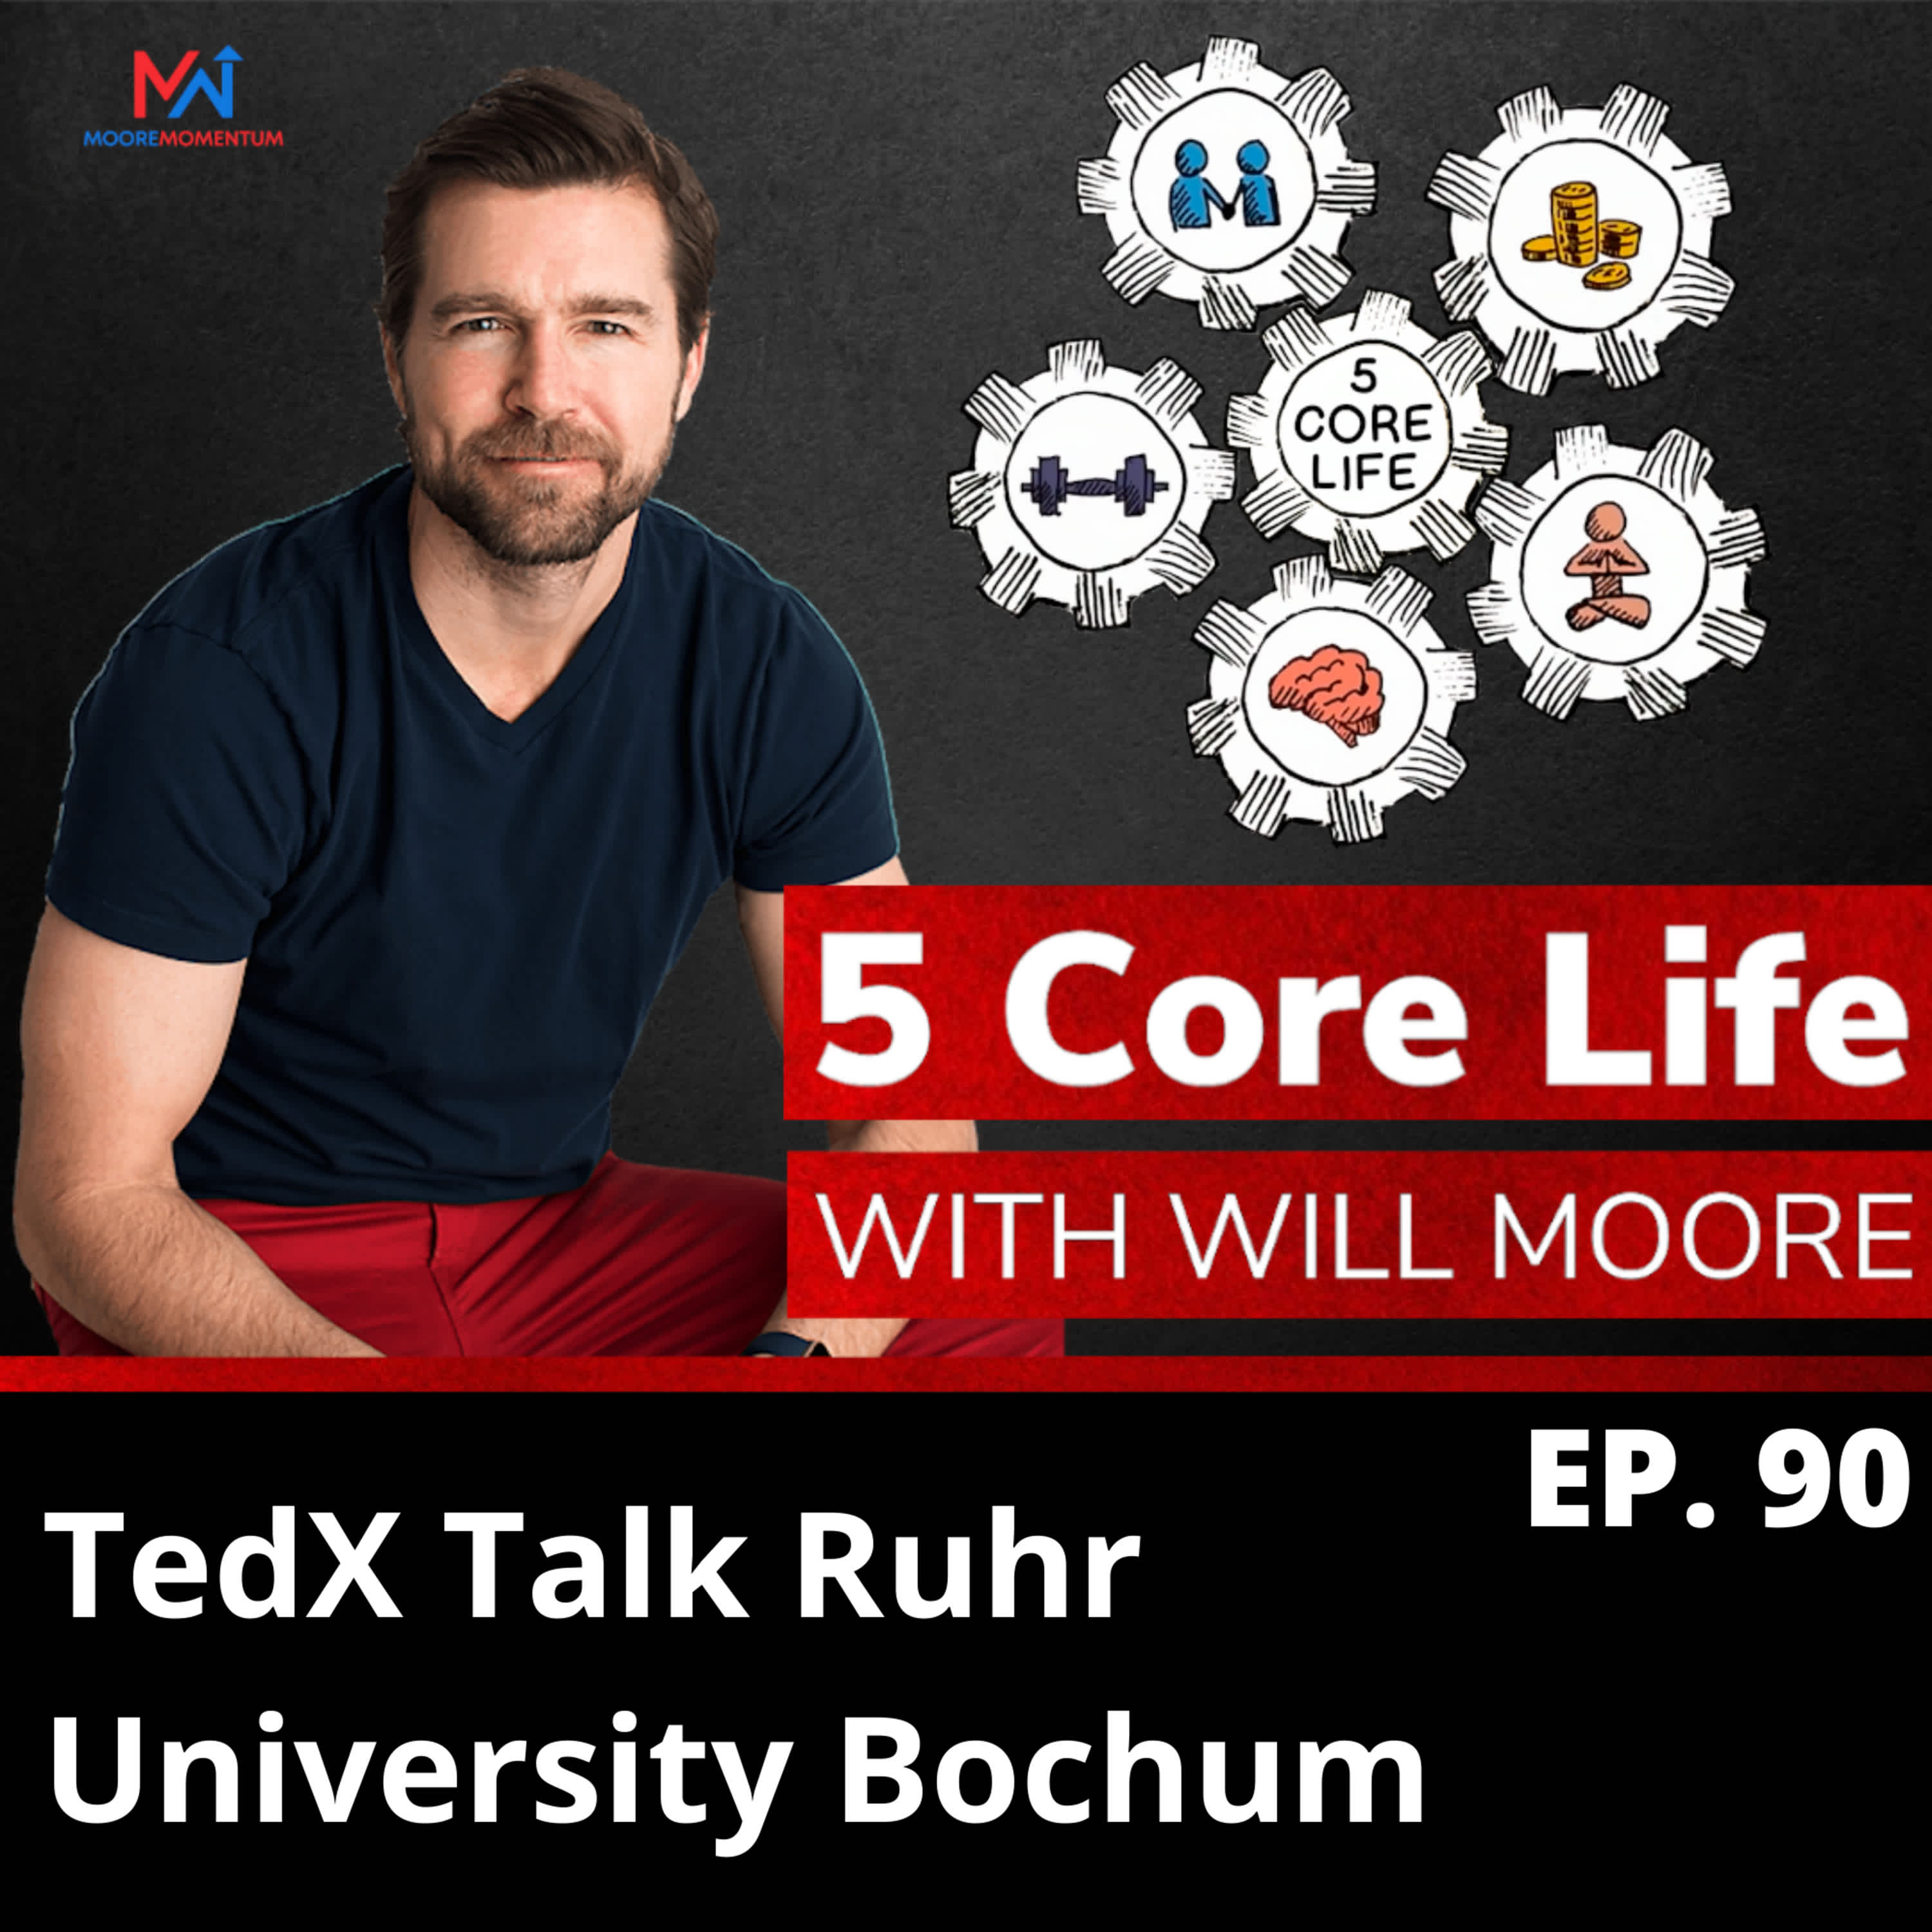 Will Moore TedX Talk Ruhr University Bochum: Gamify Your Life, From Rockbottom to Living a 5 Core Life